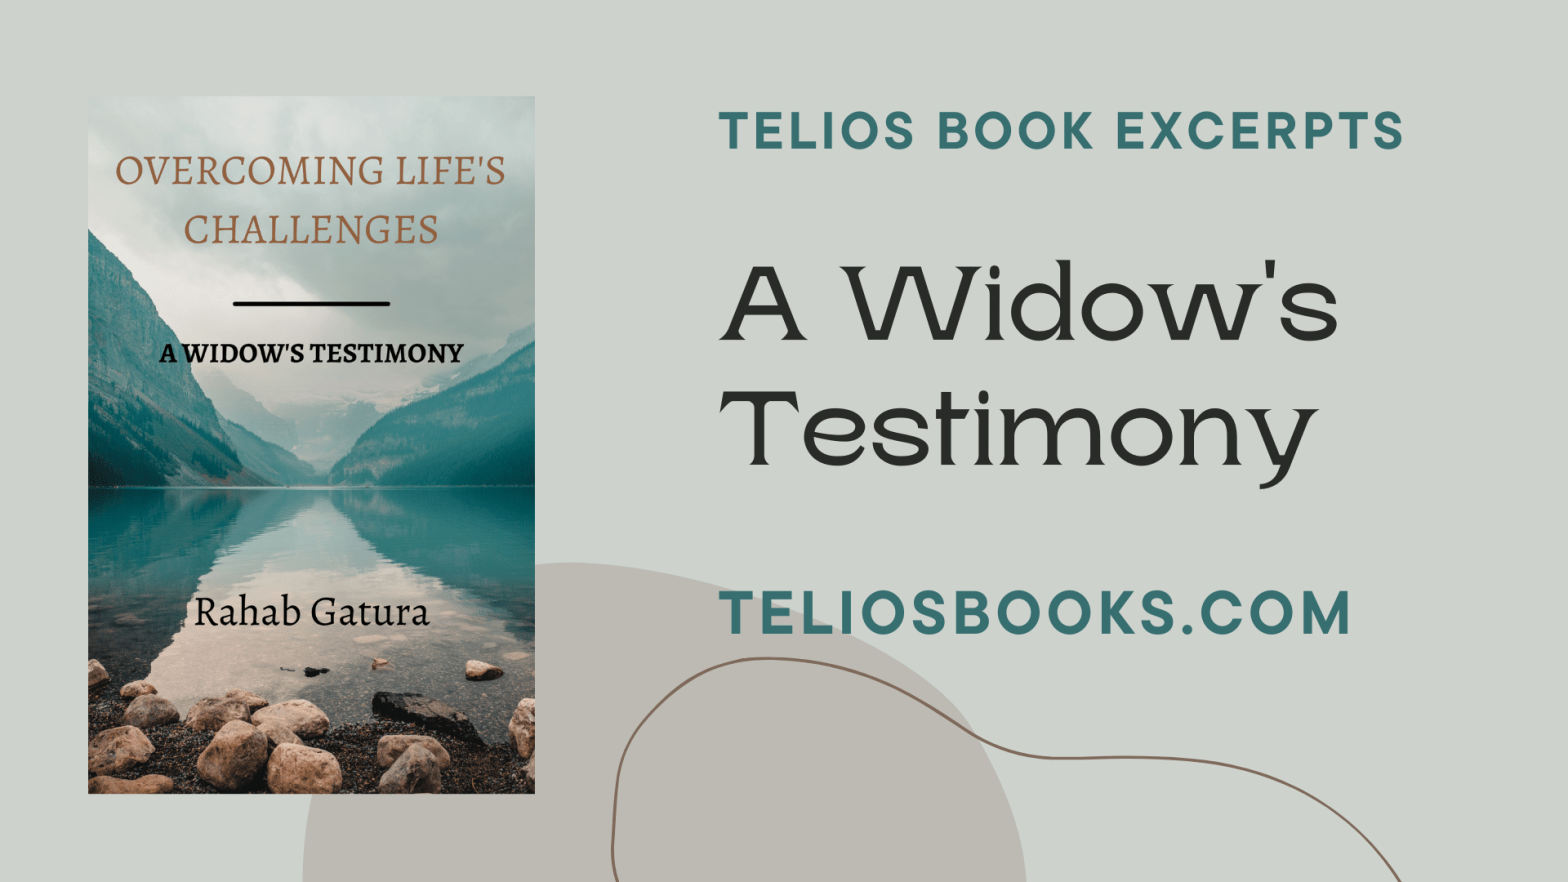 Kenyan Book Excerpt From Overcoming Life's Challenges - A Widow's Testimony | Christian Grief Book By Kenyan Author Rahab Gatura | Telios Bookstore